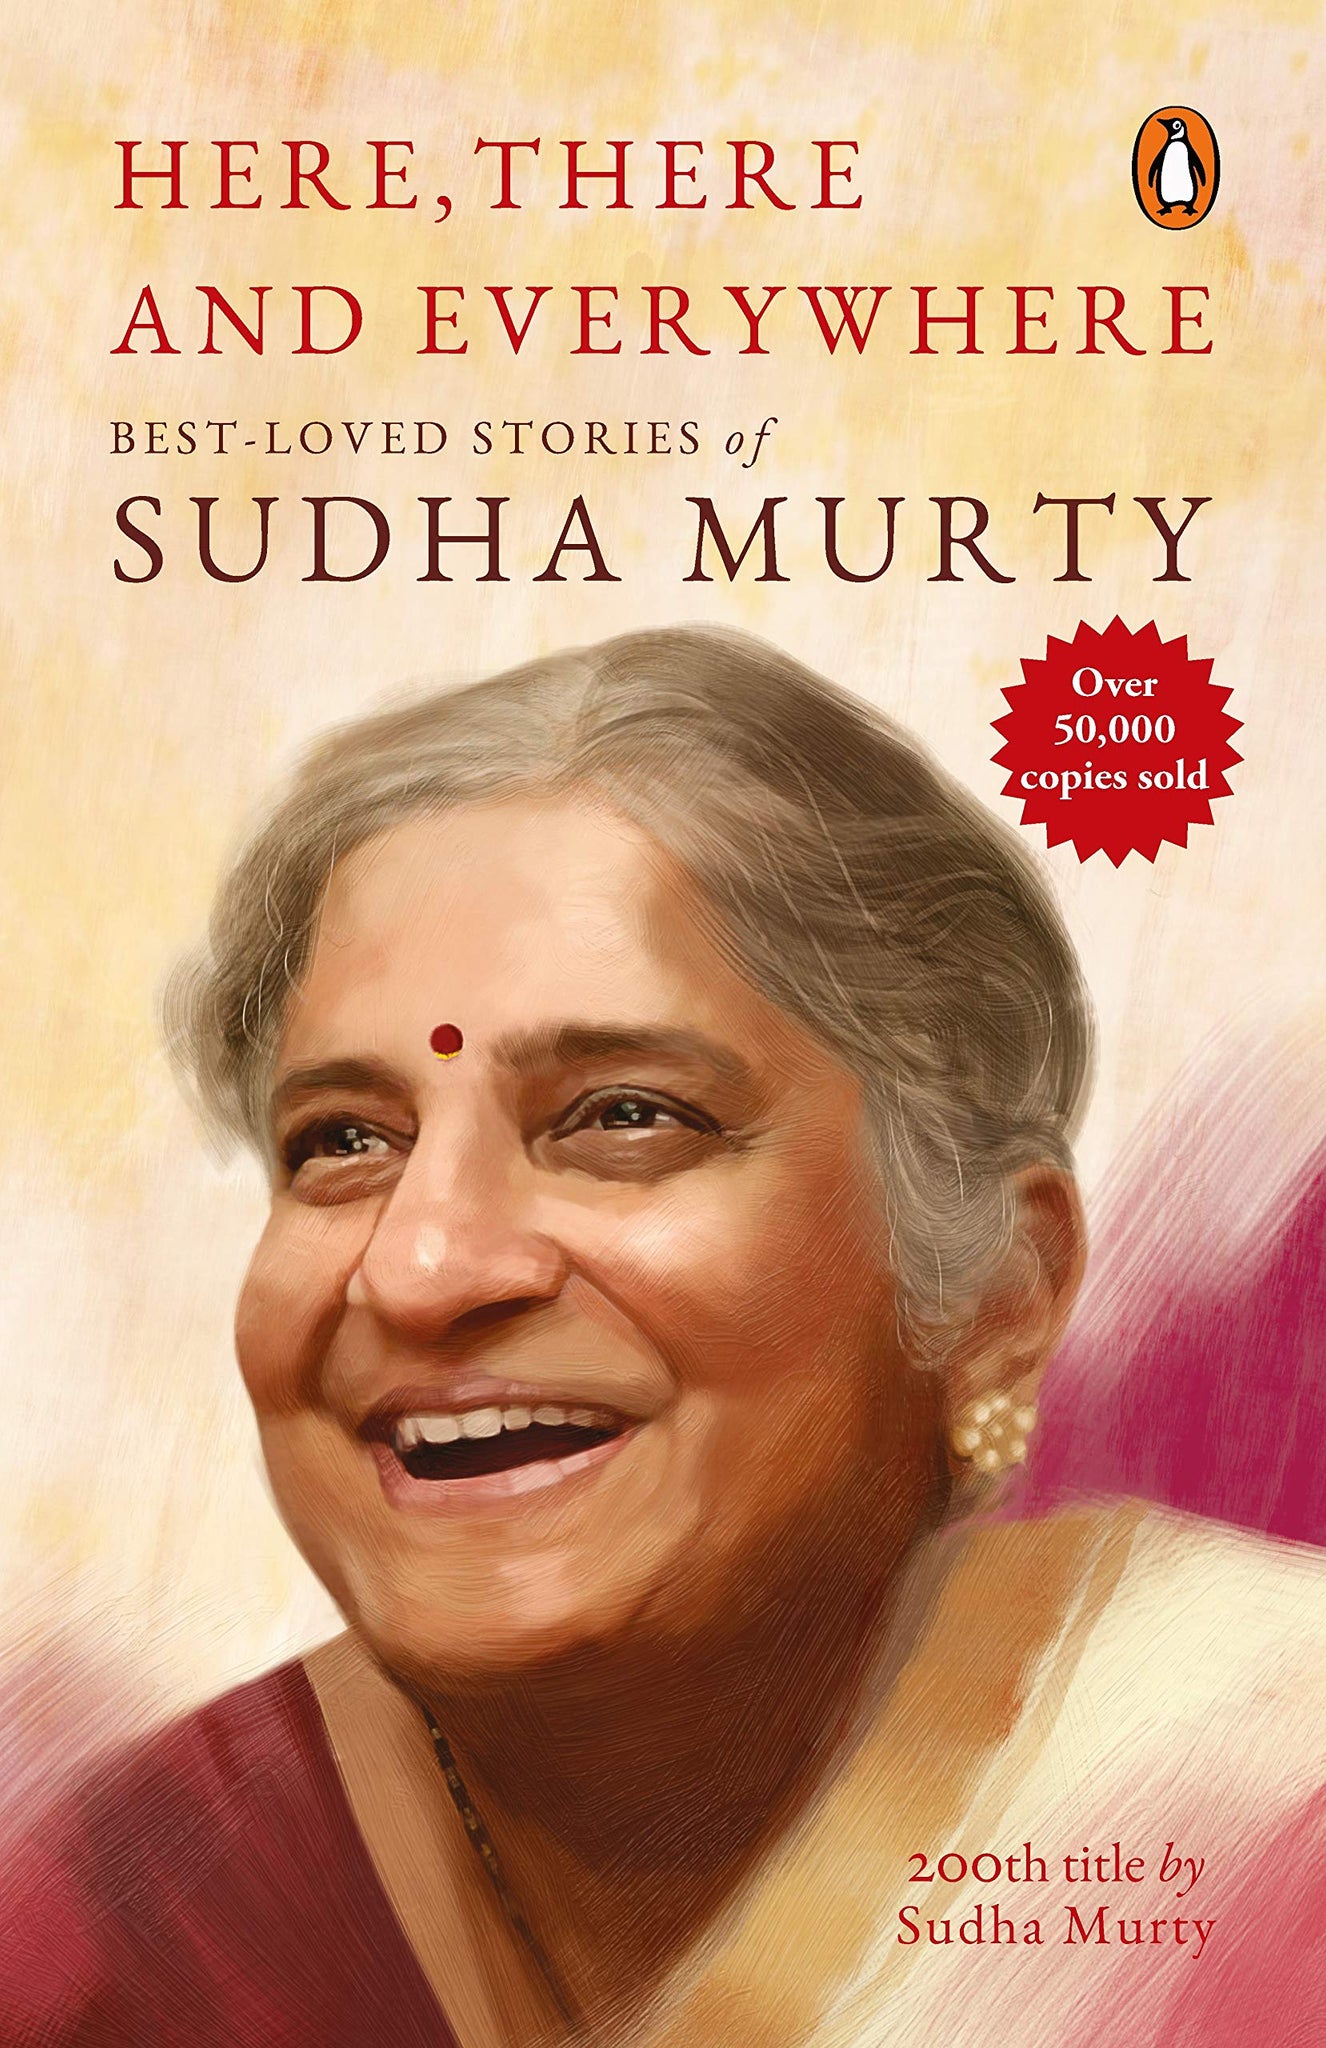 Here, There and Everywhere - Sudha Murty